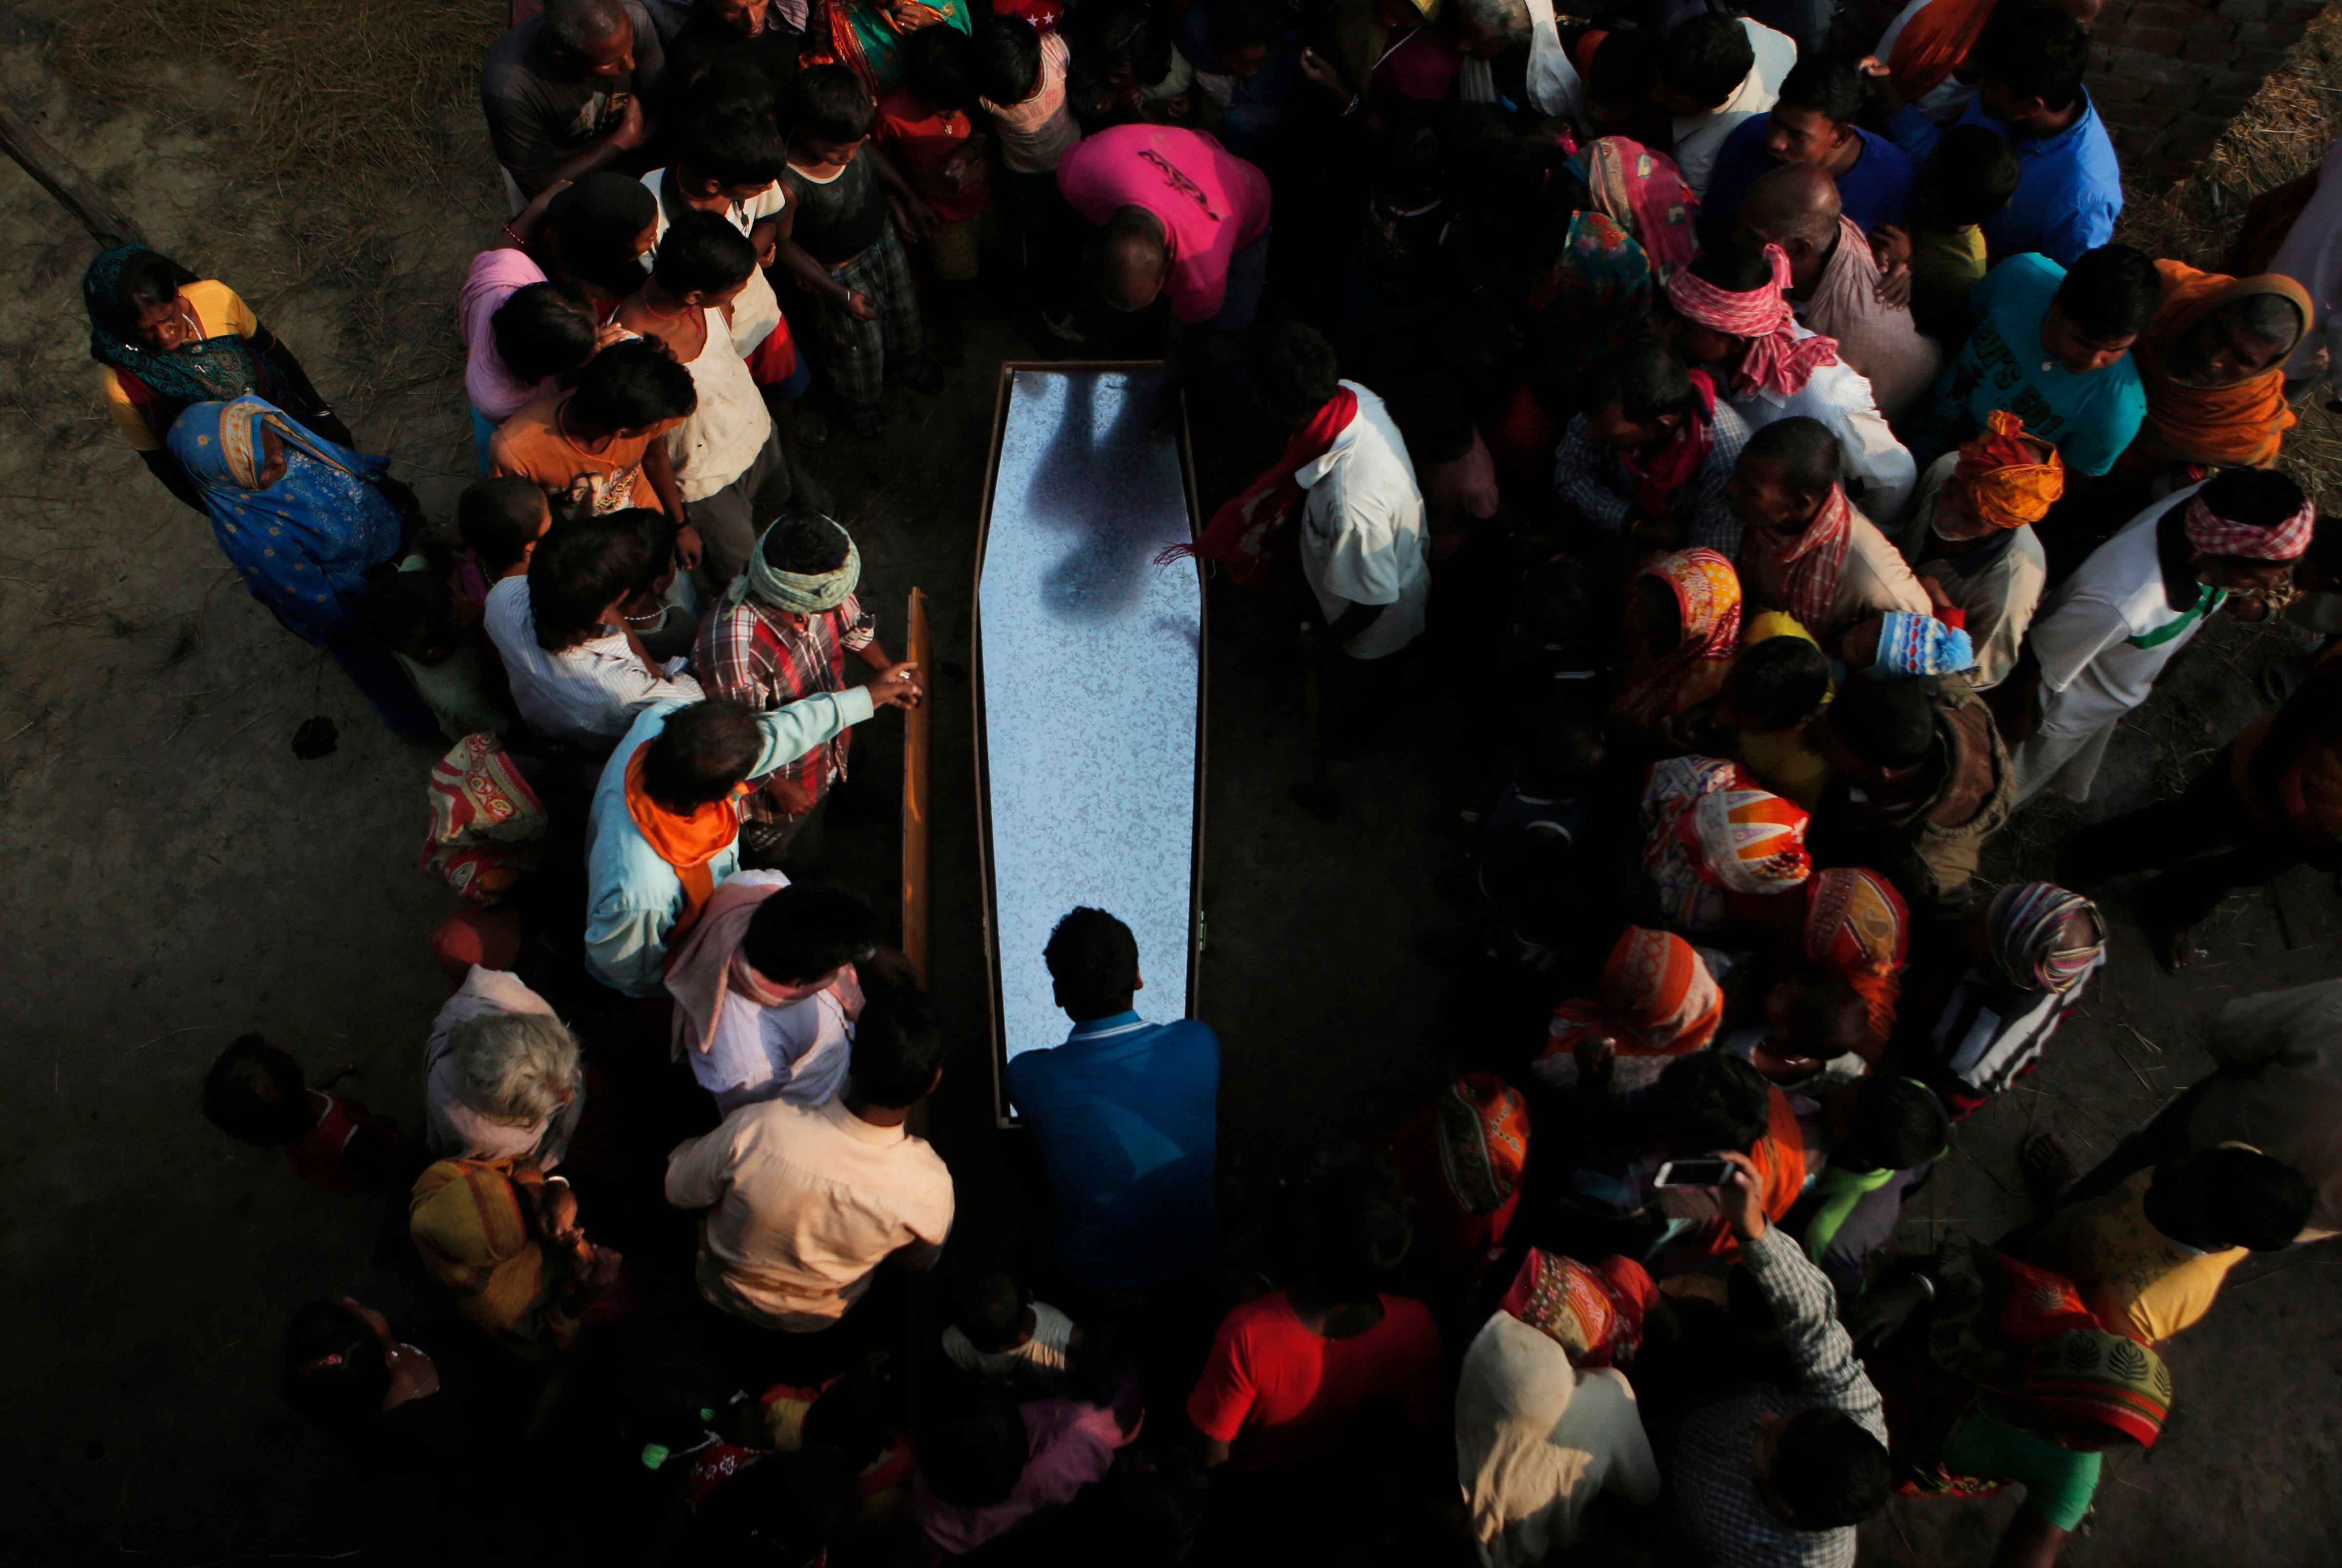 	Mandatory Credit: Photo by Niranjan Shrestha/AP/Shutterstock (7647243a)
Relatives and villagers gather around the coffin of Balkisun Mandal Khatwe at Belhi village, Saptari district of Nepal. Balkisun, who had been working for Habtoor Leighton Group in Qatar for less than a month, died in his sleep. The number of Nepali workers going abroad has more than doubled since the country began promoting foreign labor in recent years: from about 220,000 in 2008 to about 500,000 in 2015. Yet the number of deaths among those workers has risen much faster in the same period. In total, over 5,000 workers from this small country have died working abroad since 2008, more than the number of U.S. troops killed in the Iraq War
Nepal Migrant Deaths - 23 Nov 2016